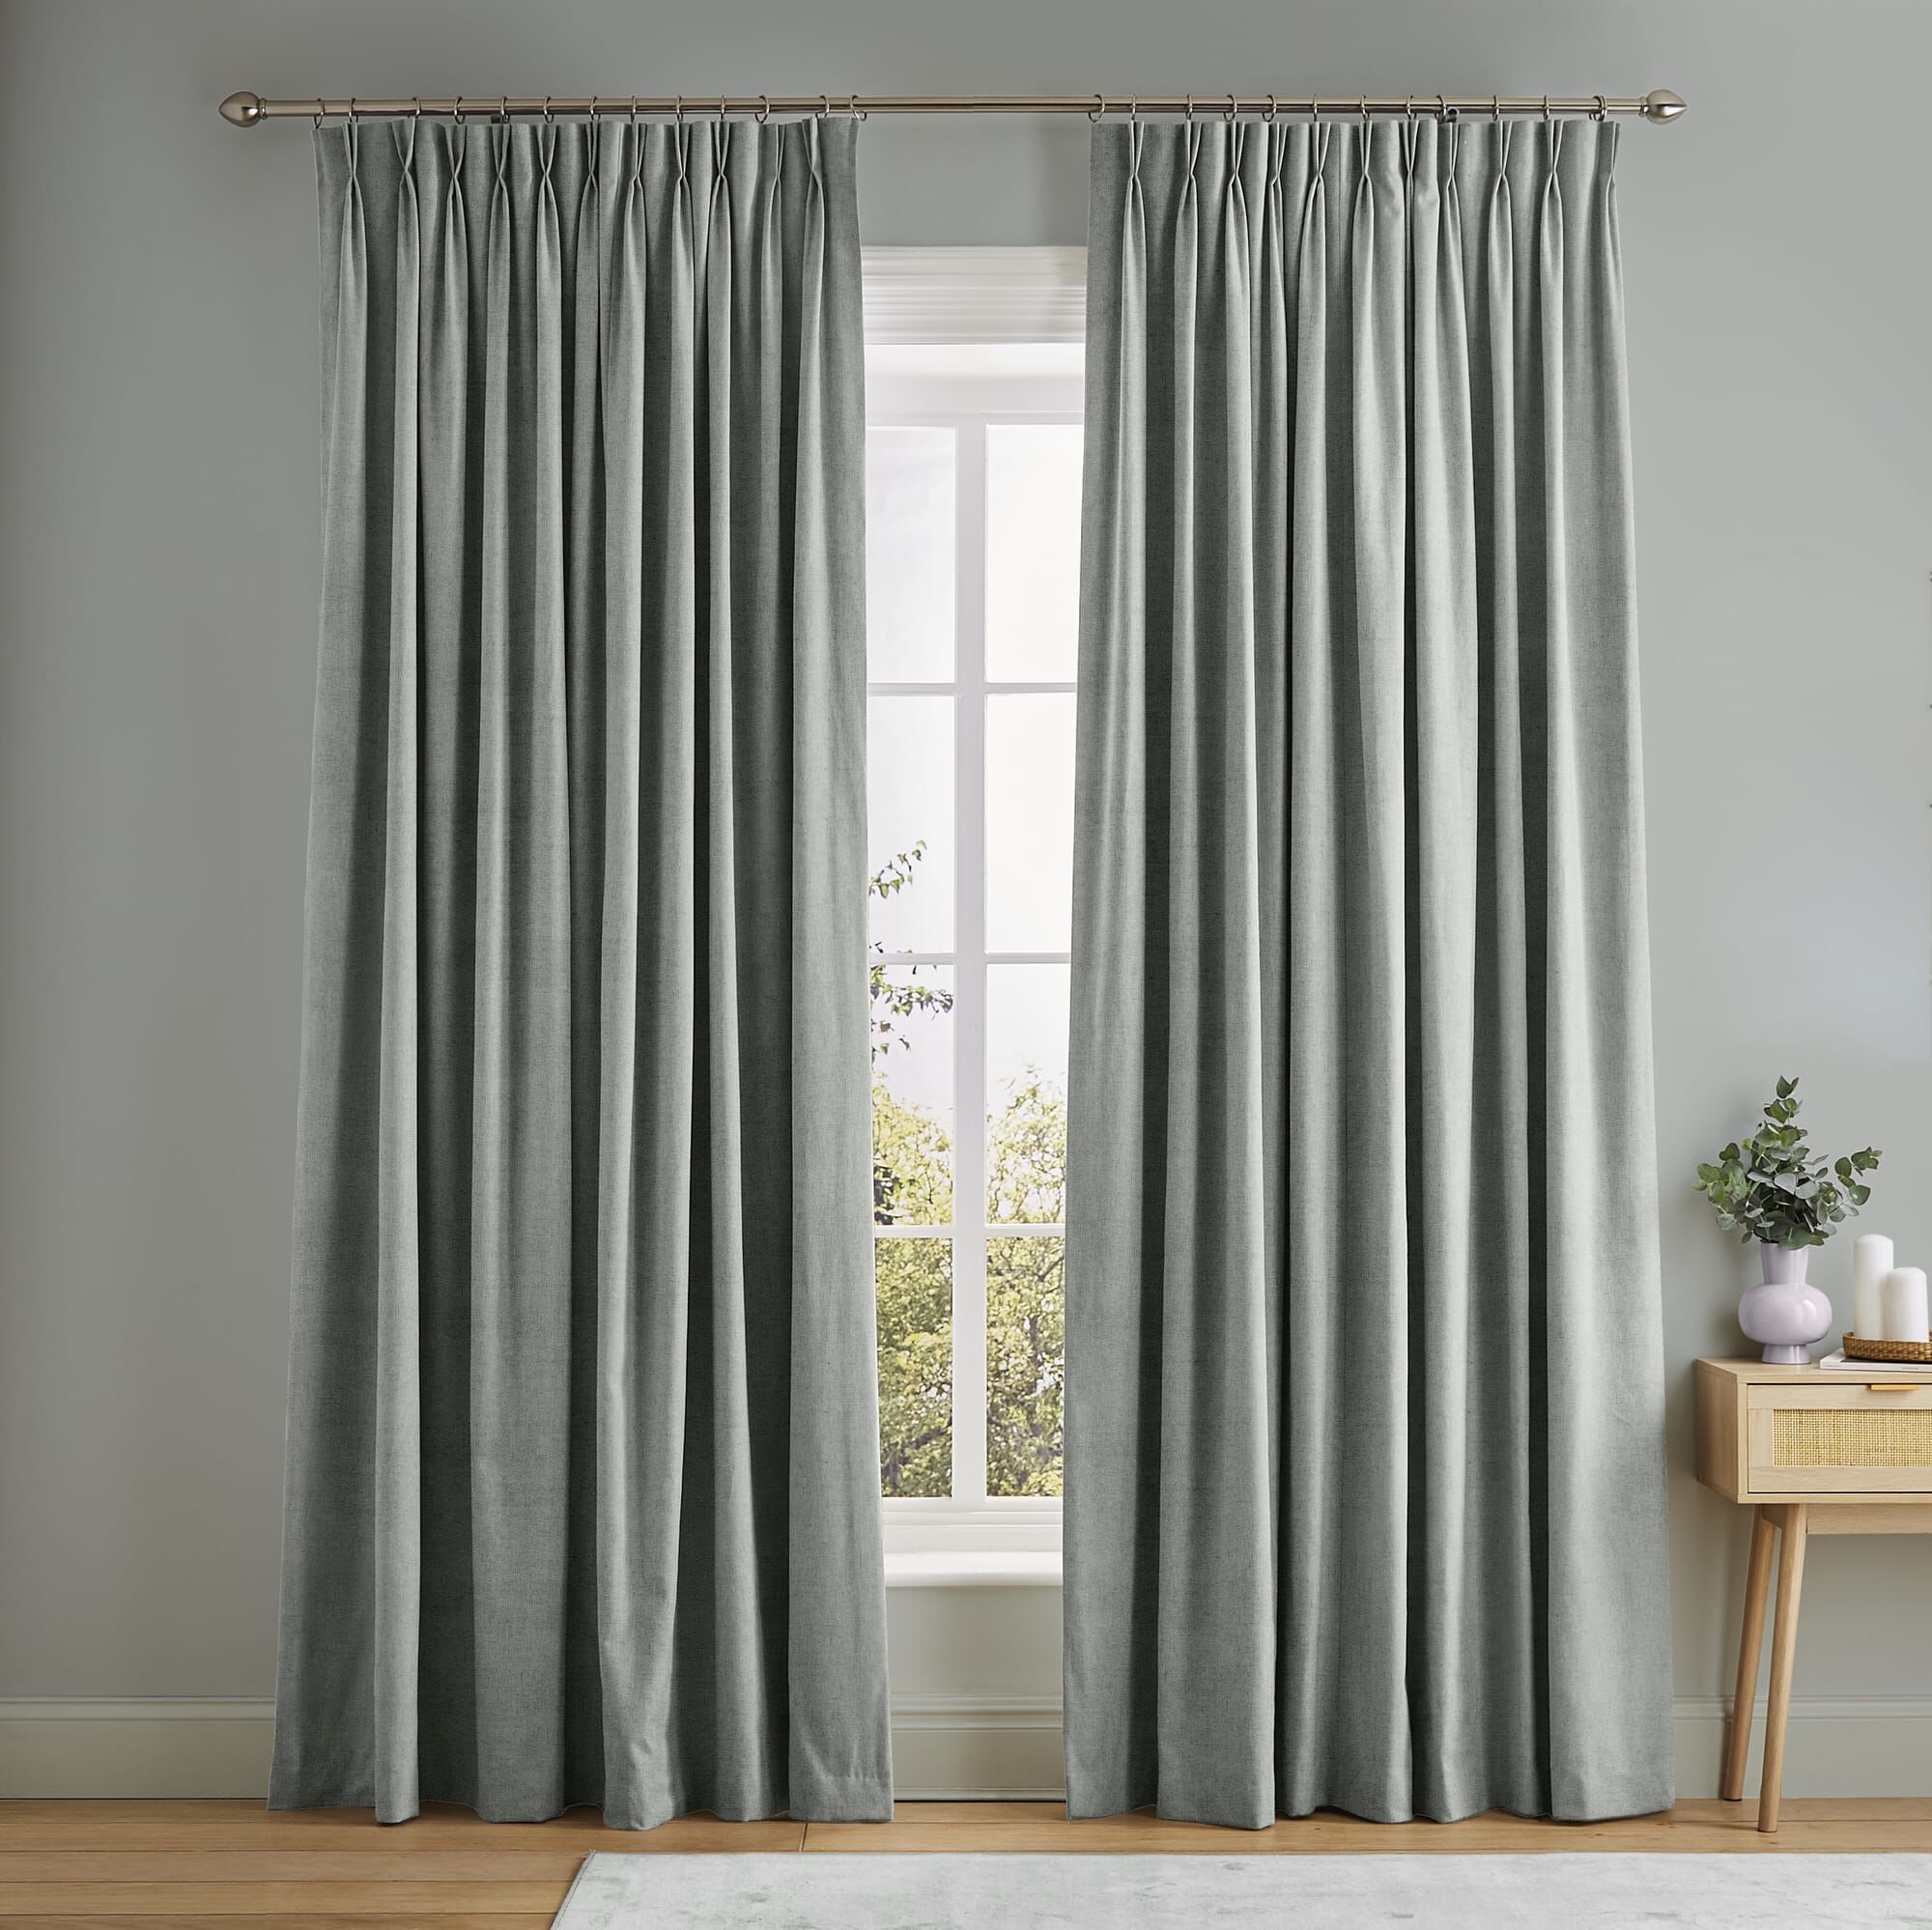 Serenity Soft Grey Curtains | Made to Measure Curtains | Graham & Brown